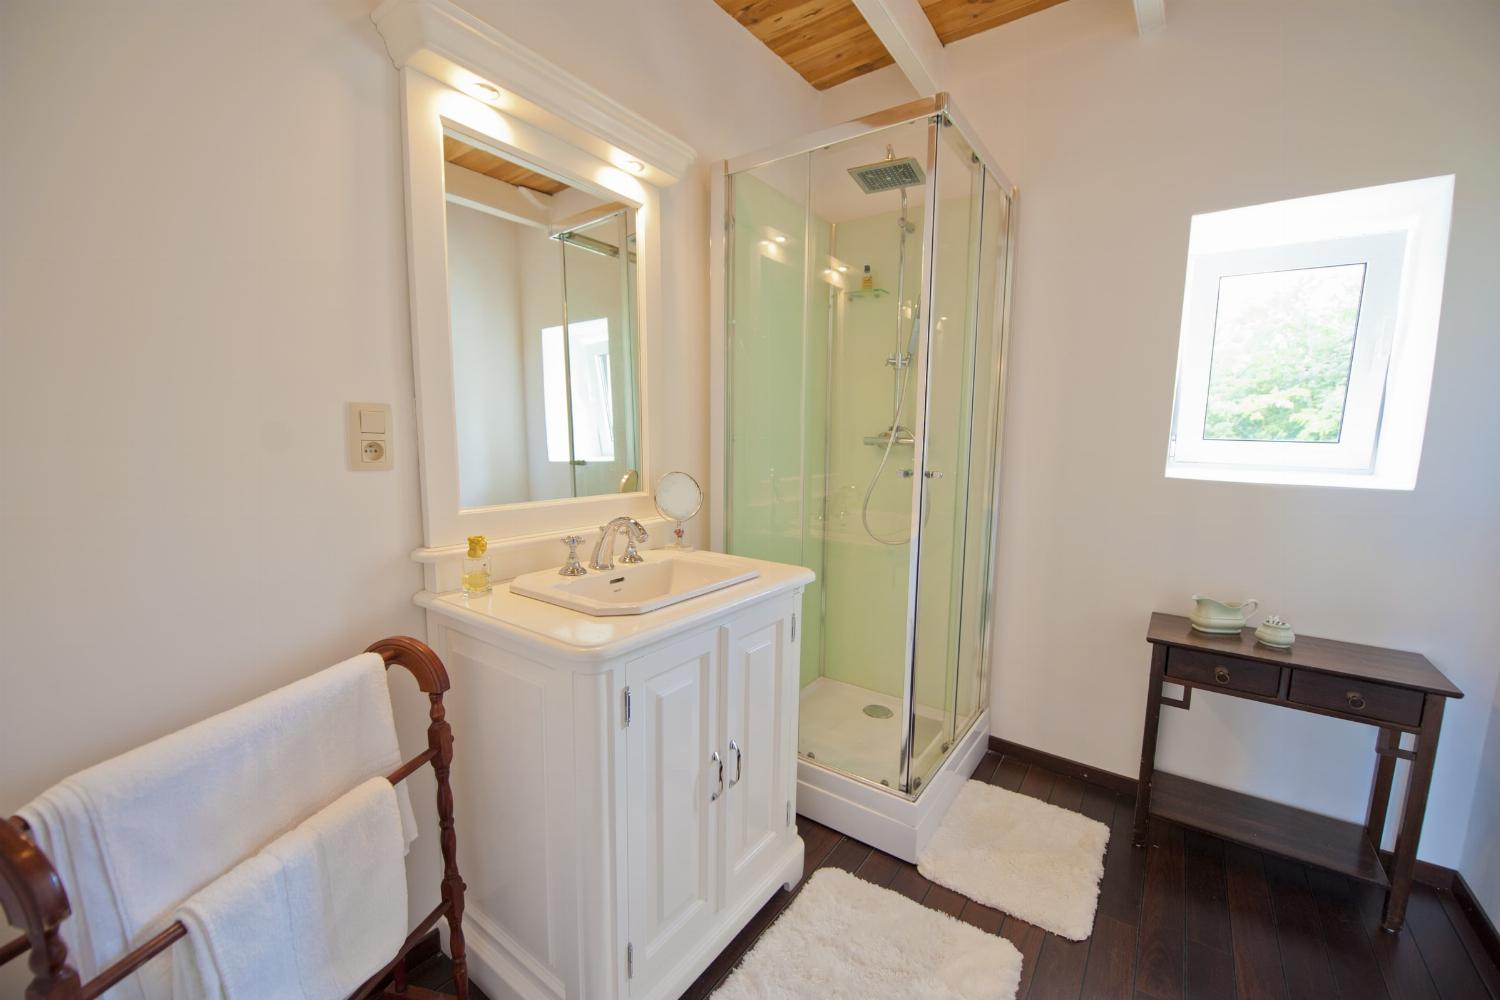 Bathroom | Rental home in the Lot